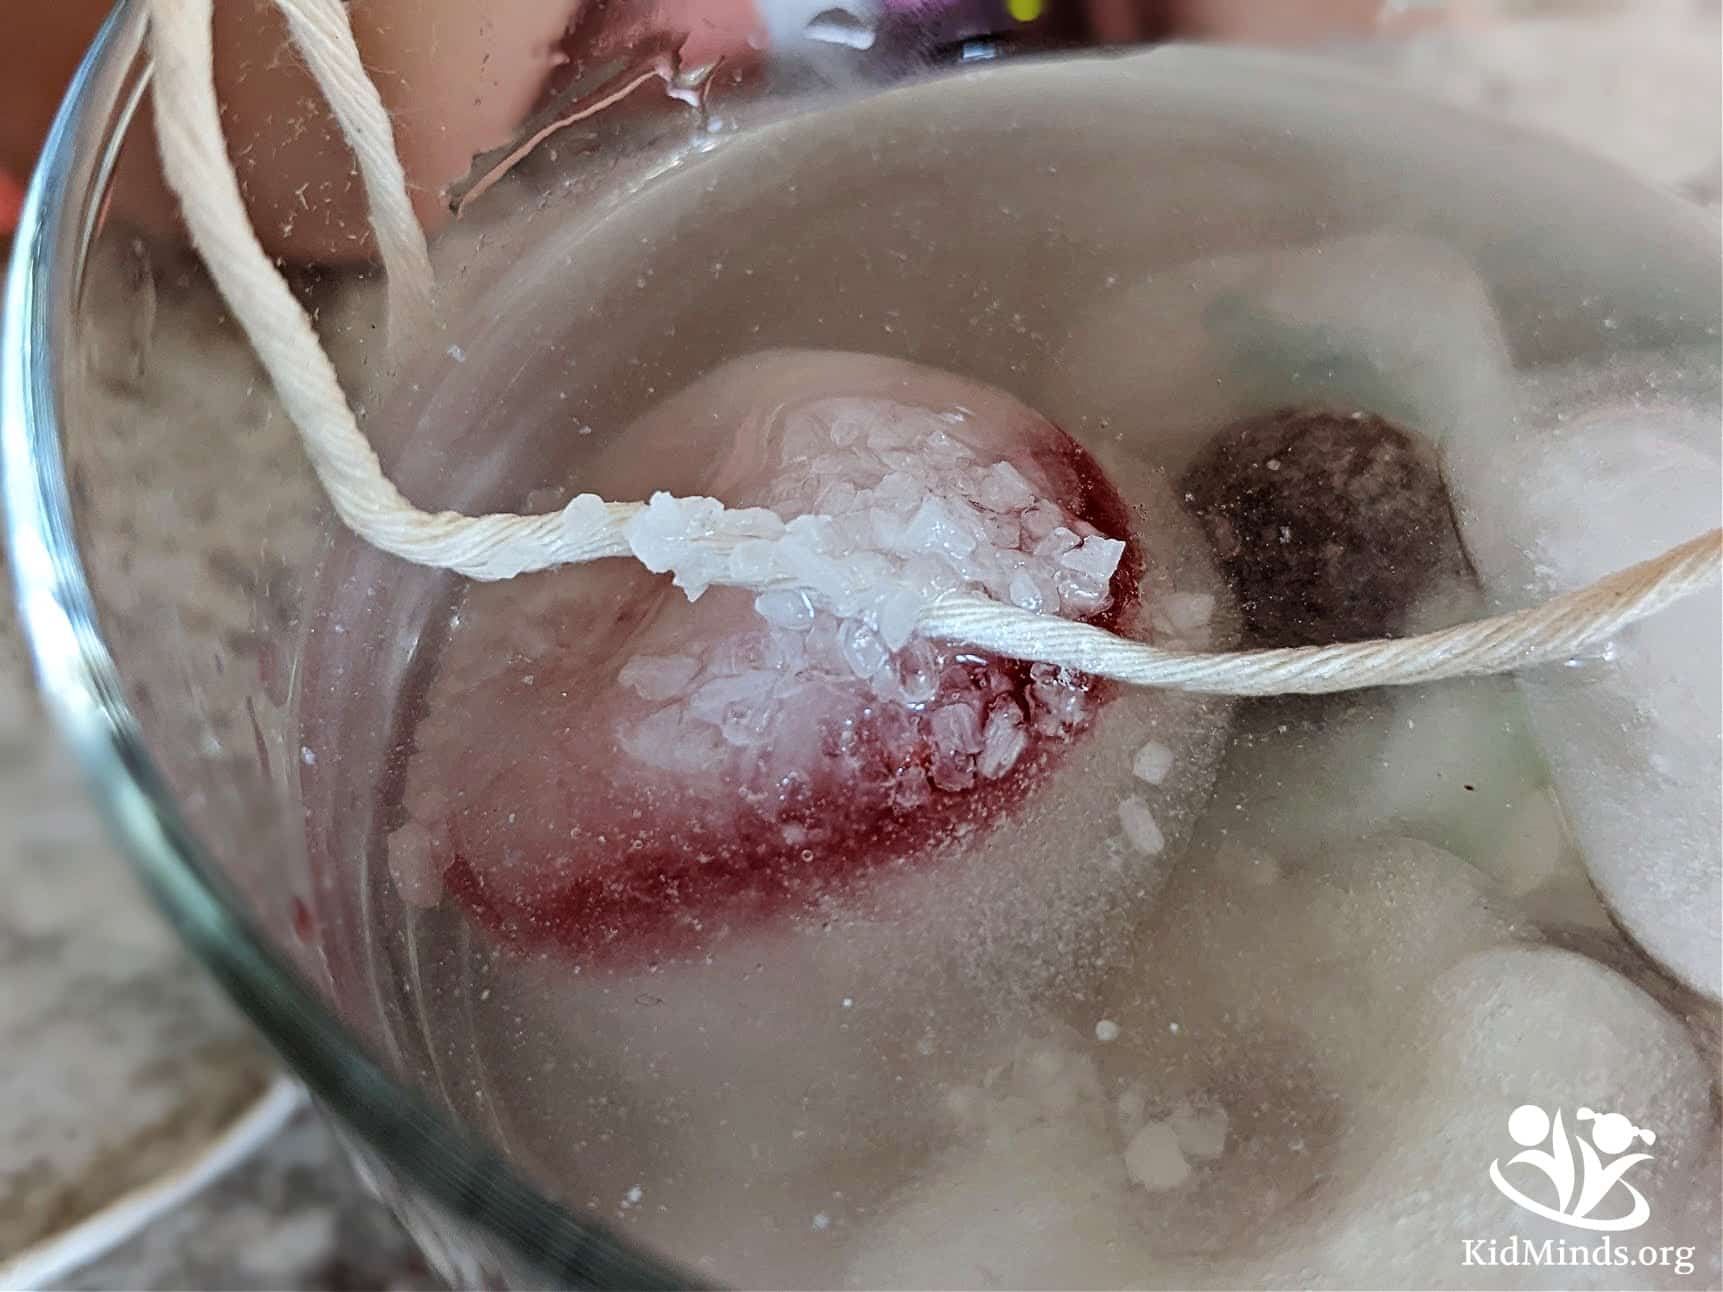 Can you lift candy from a glass without using your hands? This experiment is a great introduction to chemistry and the science of ice! #STEM #scienceforkids #handsonlearning #kidsactivities #earlyeducation #kidminds #laughingkidslearn